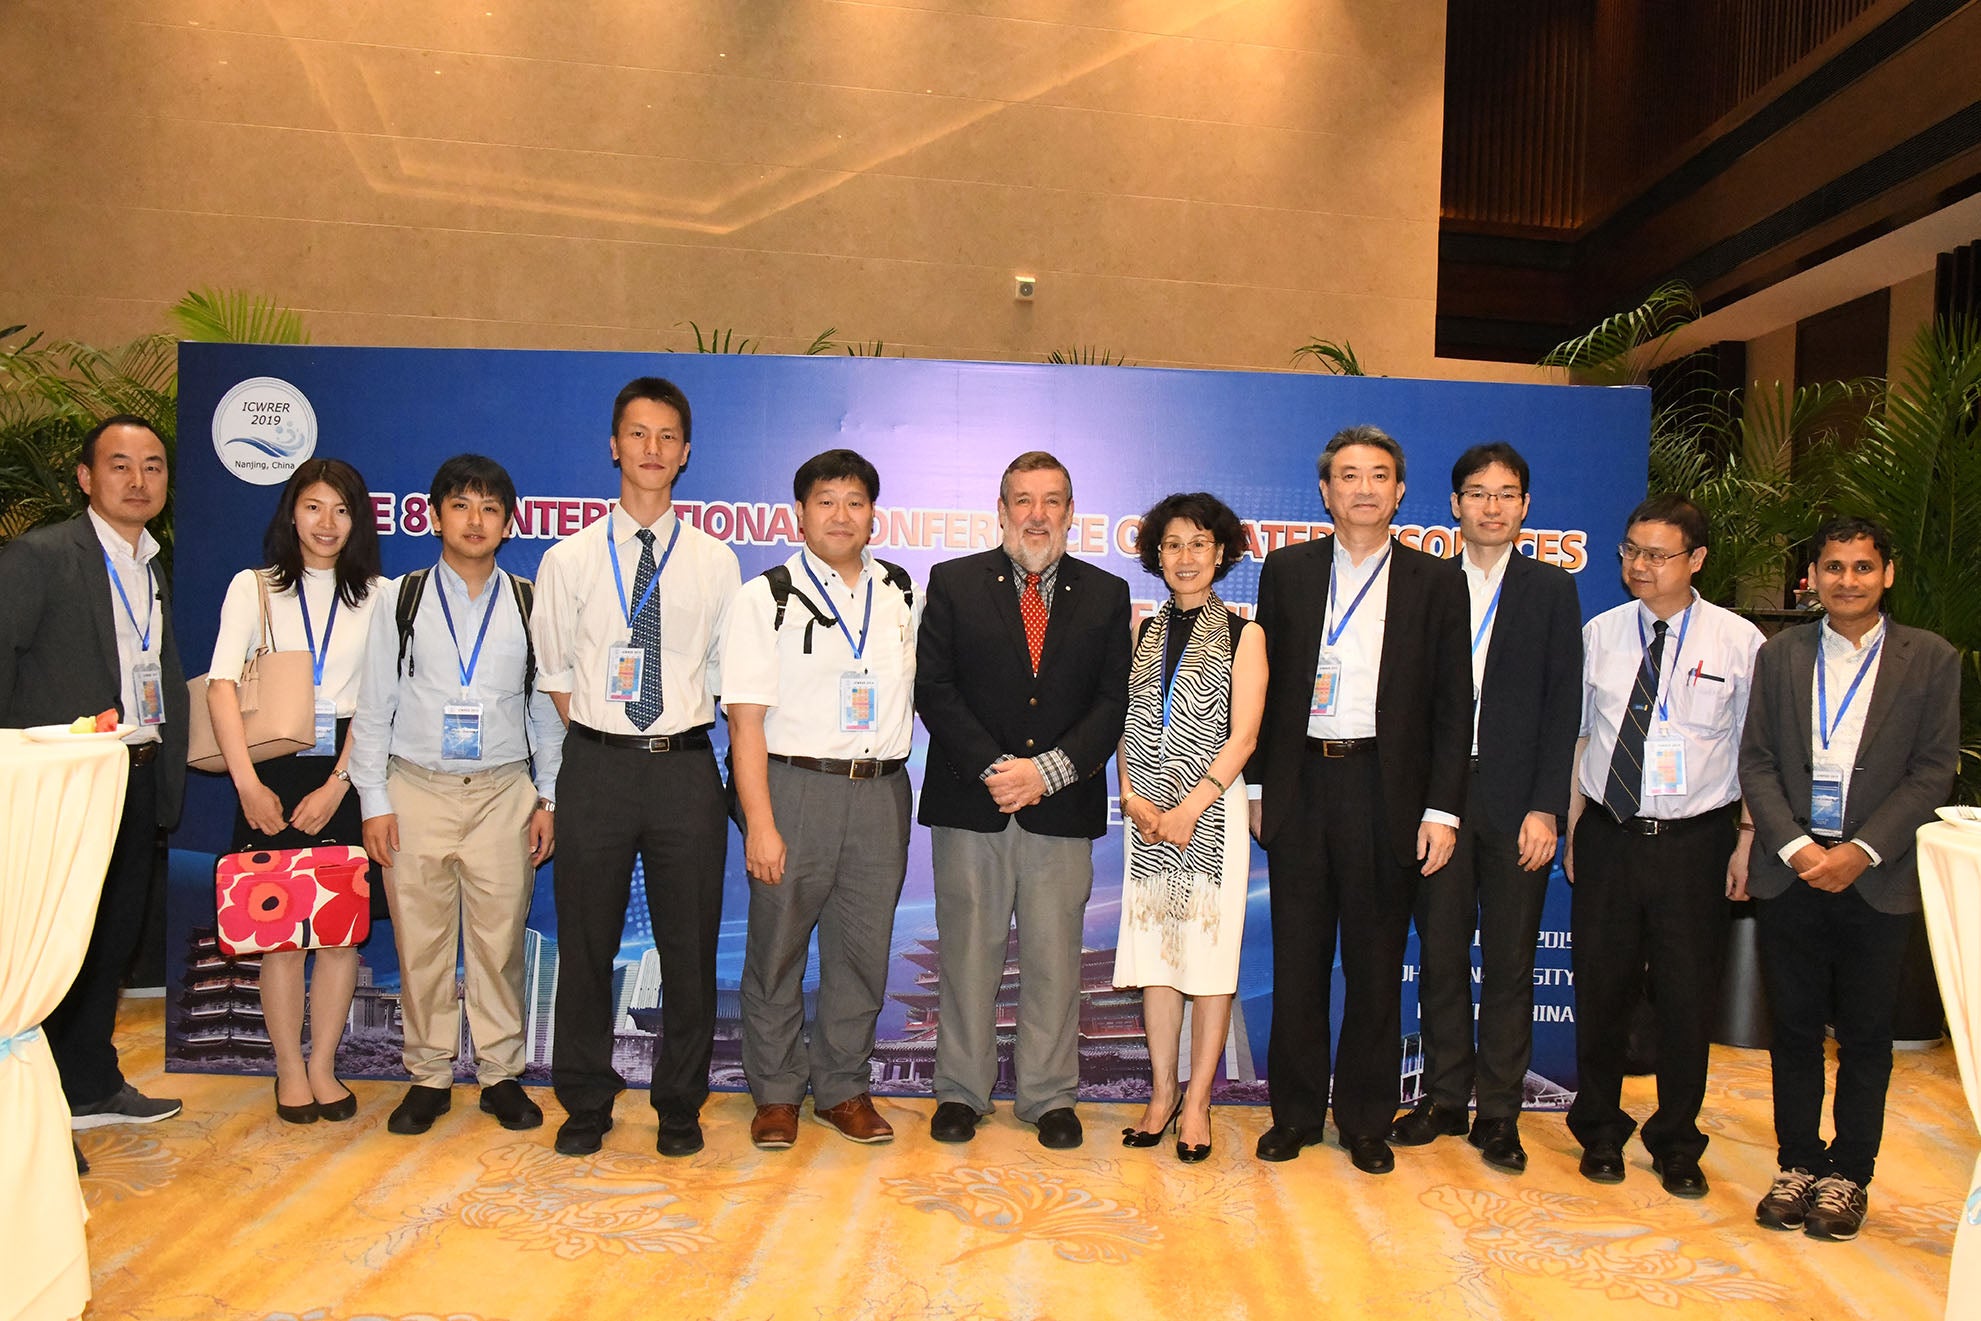 Conference Photo